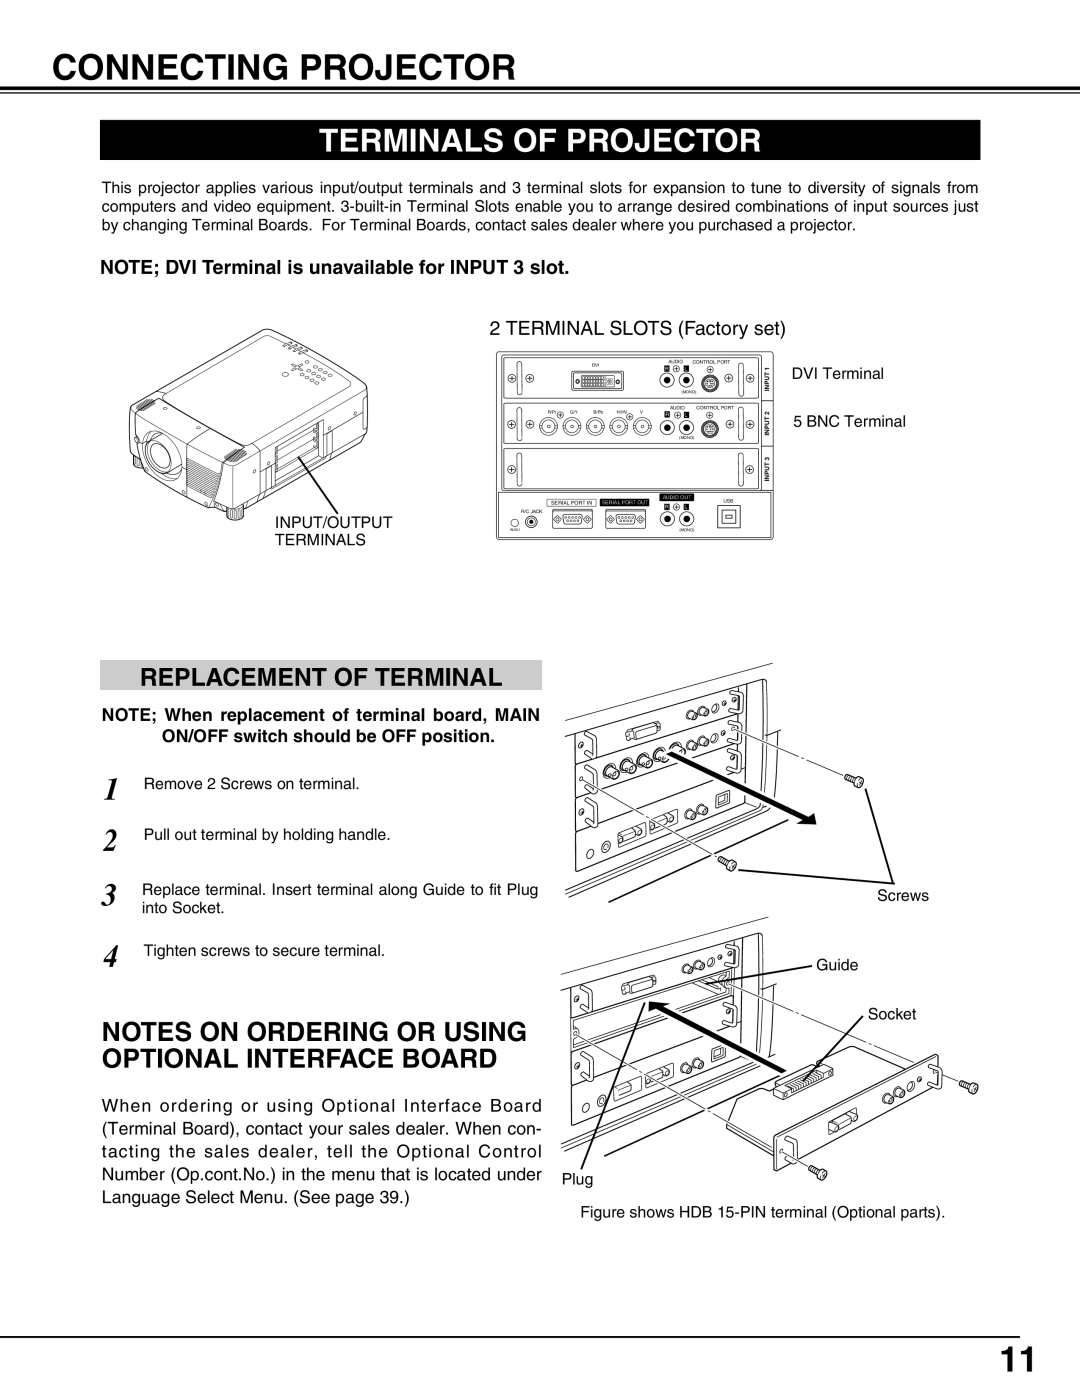 Christie Digital Systems 38-MX2001-01 user manual Connecting Projector, Terminals Of Projector, Replacement Of Terminal 